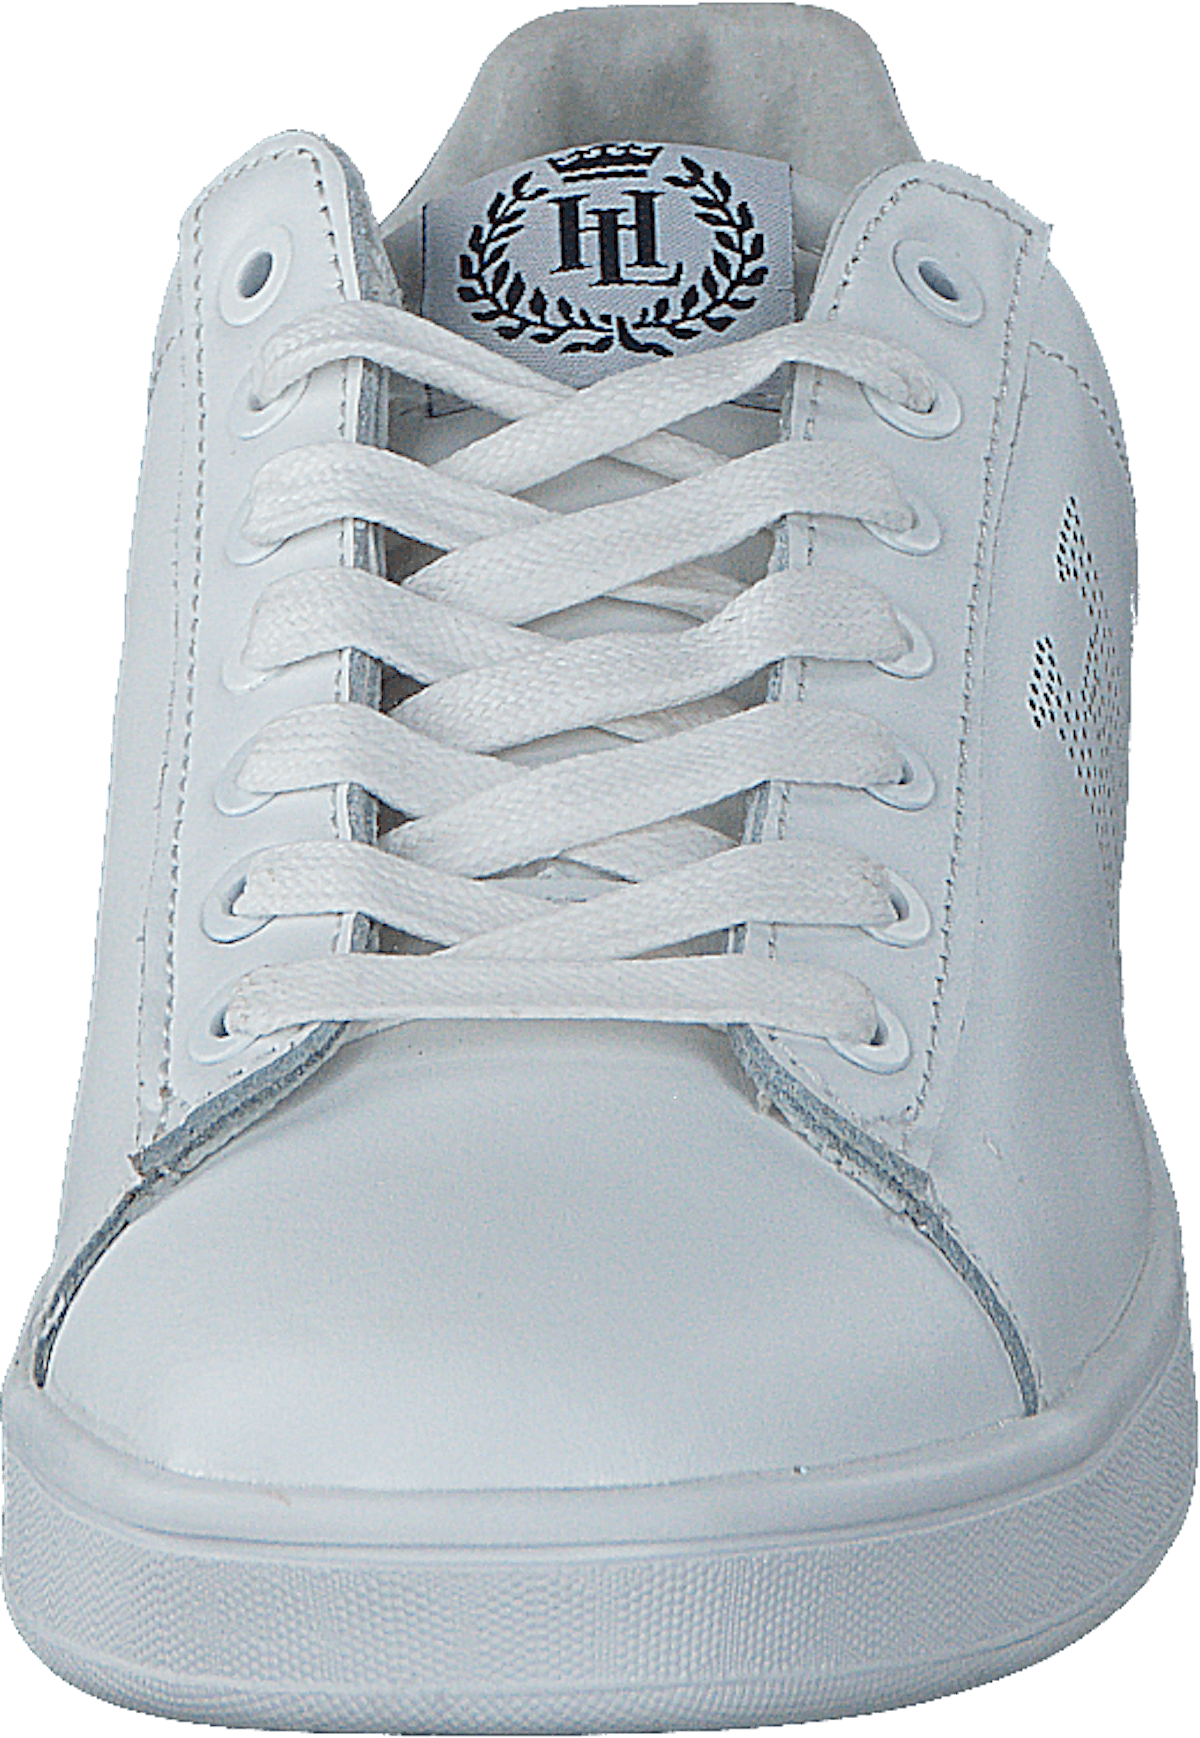 Lace Trainer White/Navy